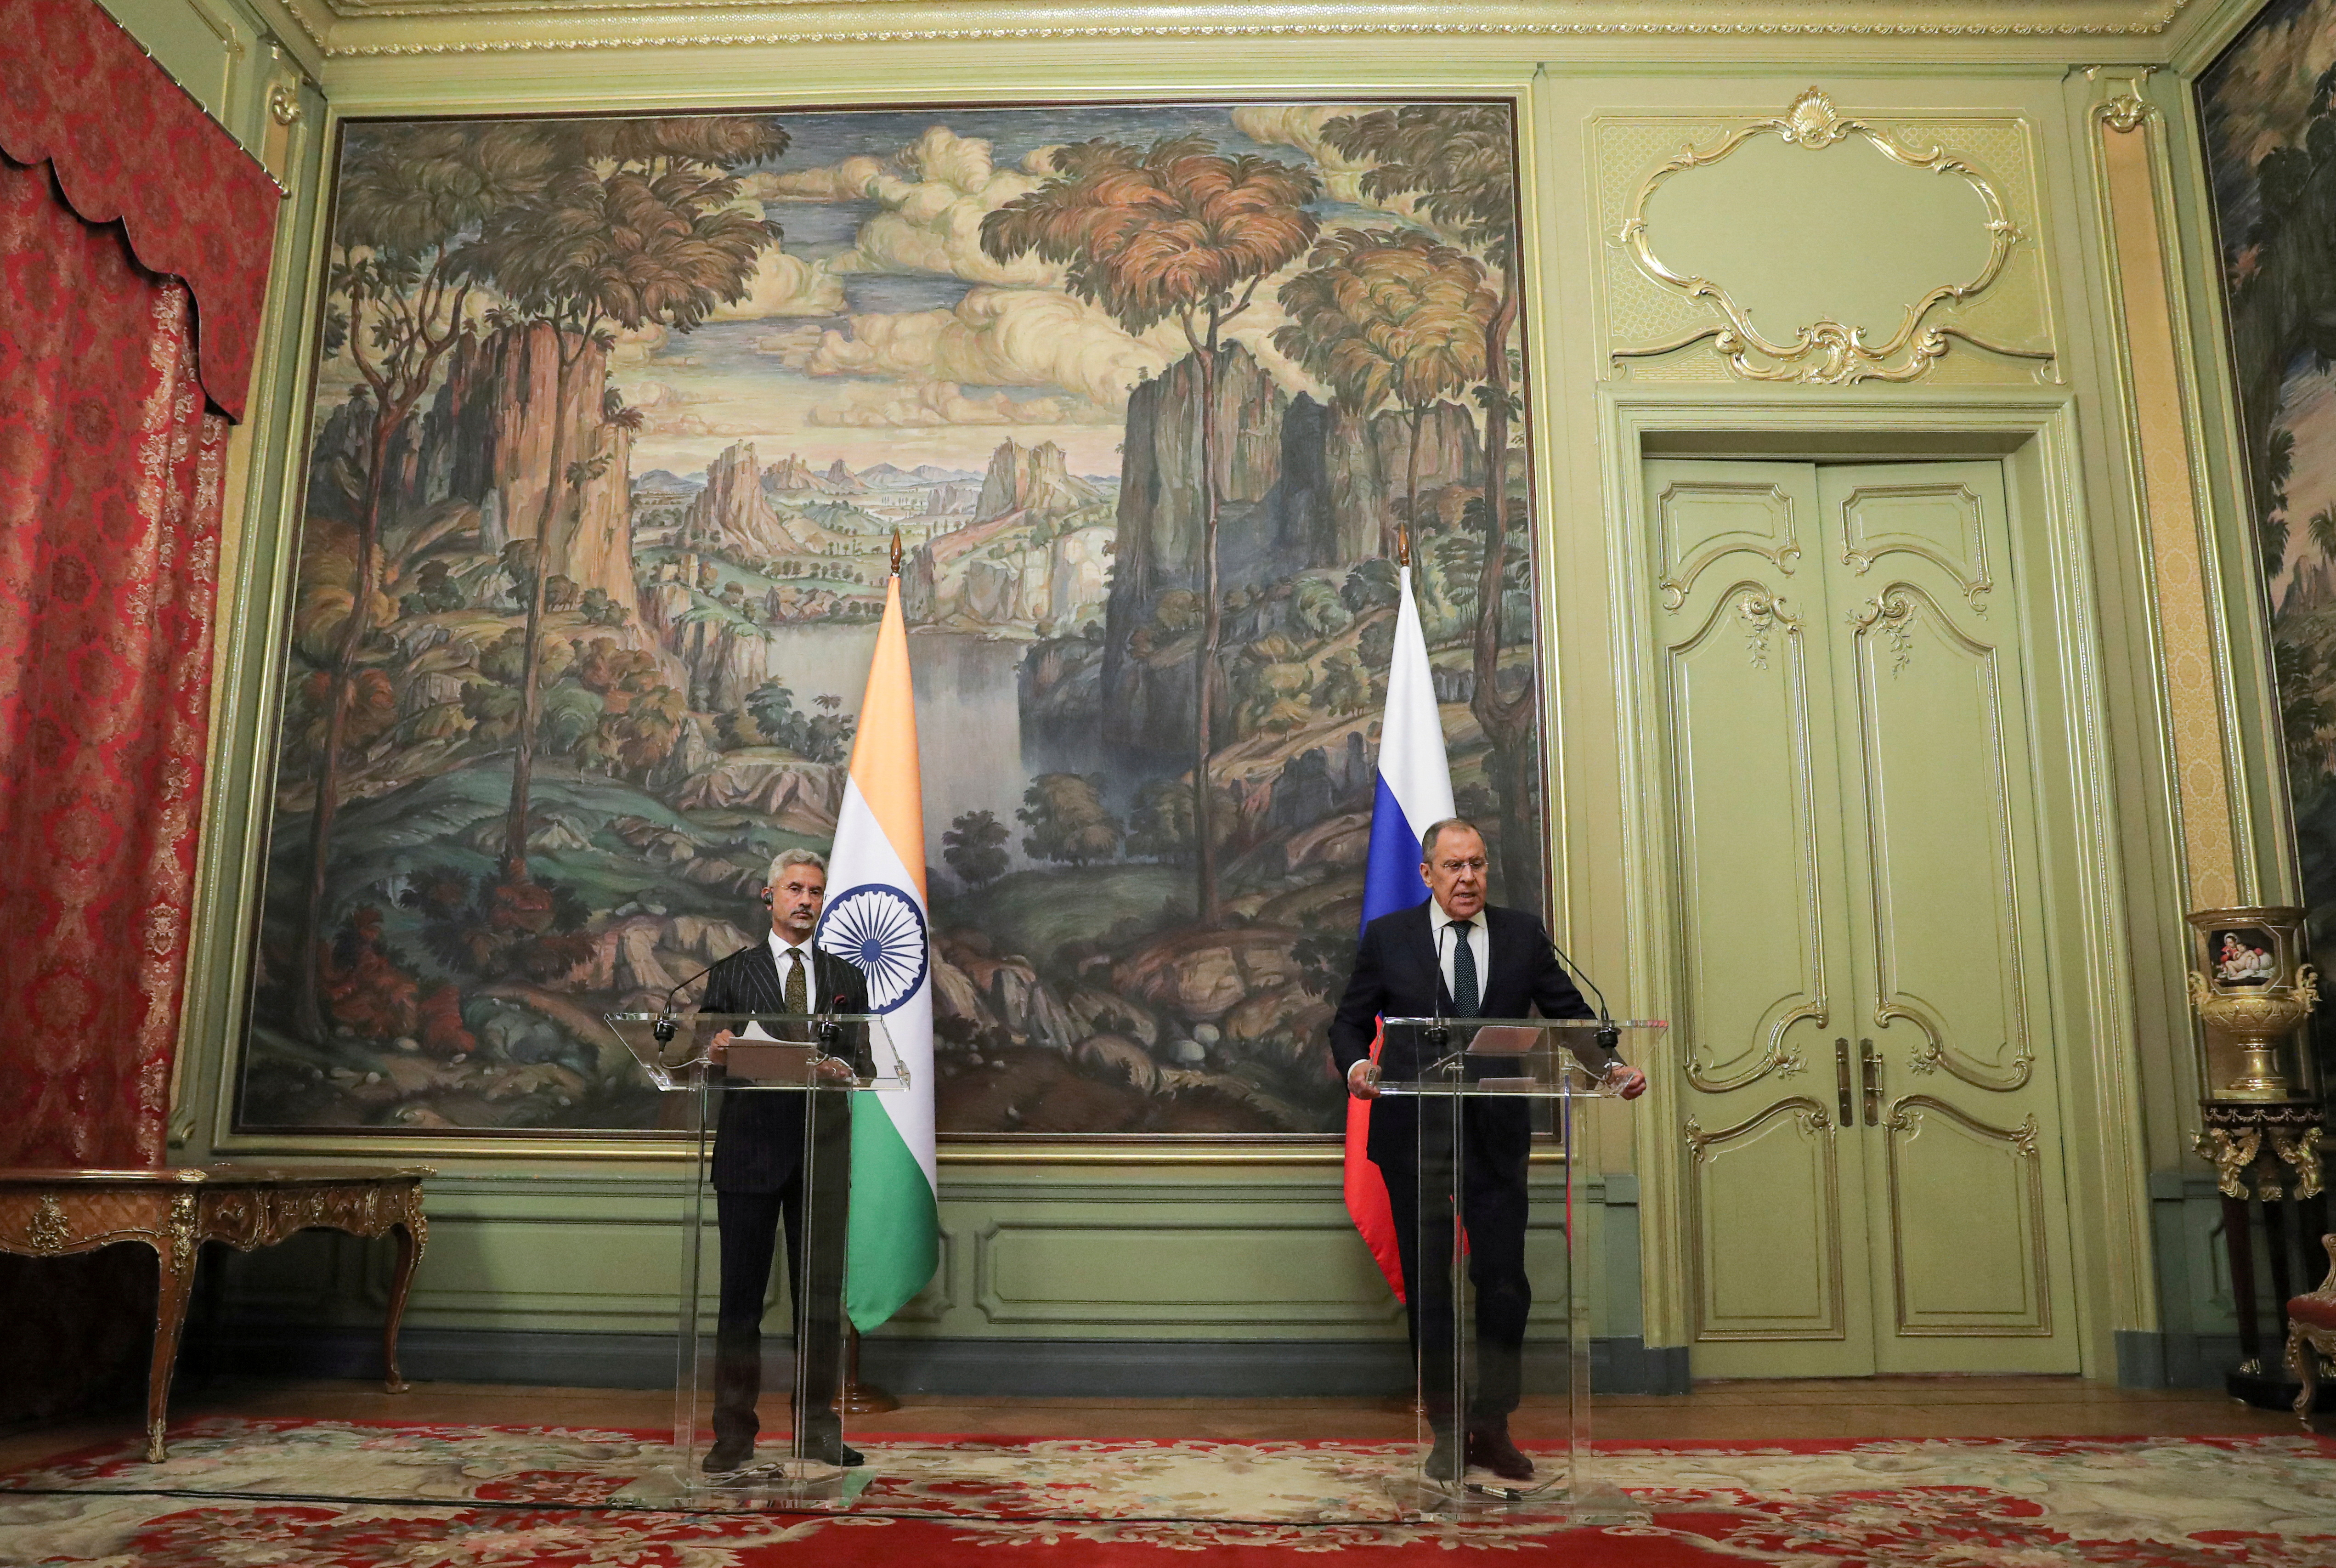 Russian Foreign Minister Lavrov and Indian Foreign Minister Jaishankar meet in Moscow